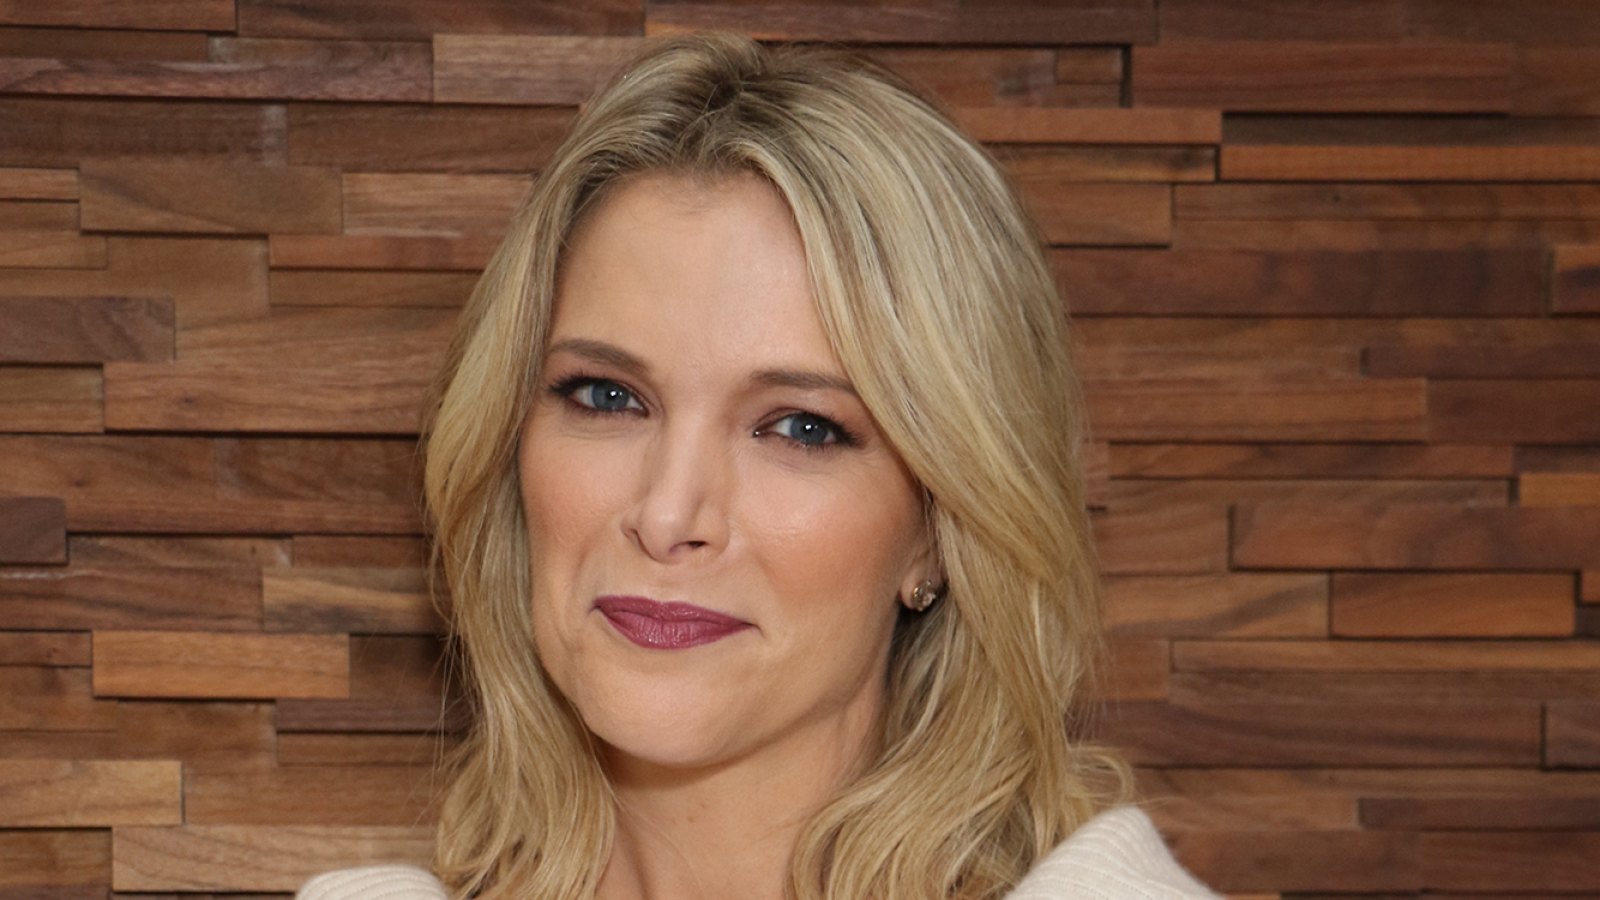 Megyn Kelly Weighs In on 'Bombshell': They 'Took Liberties'